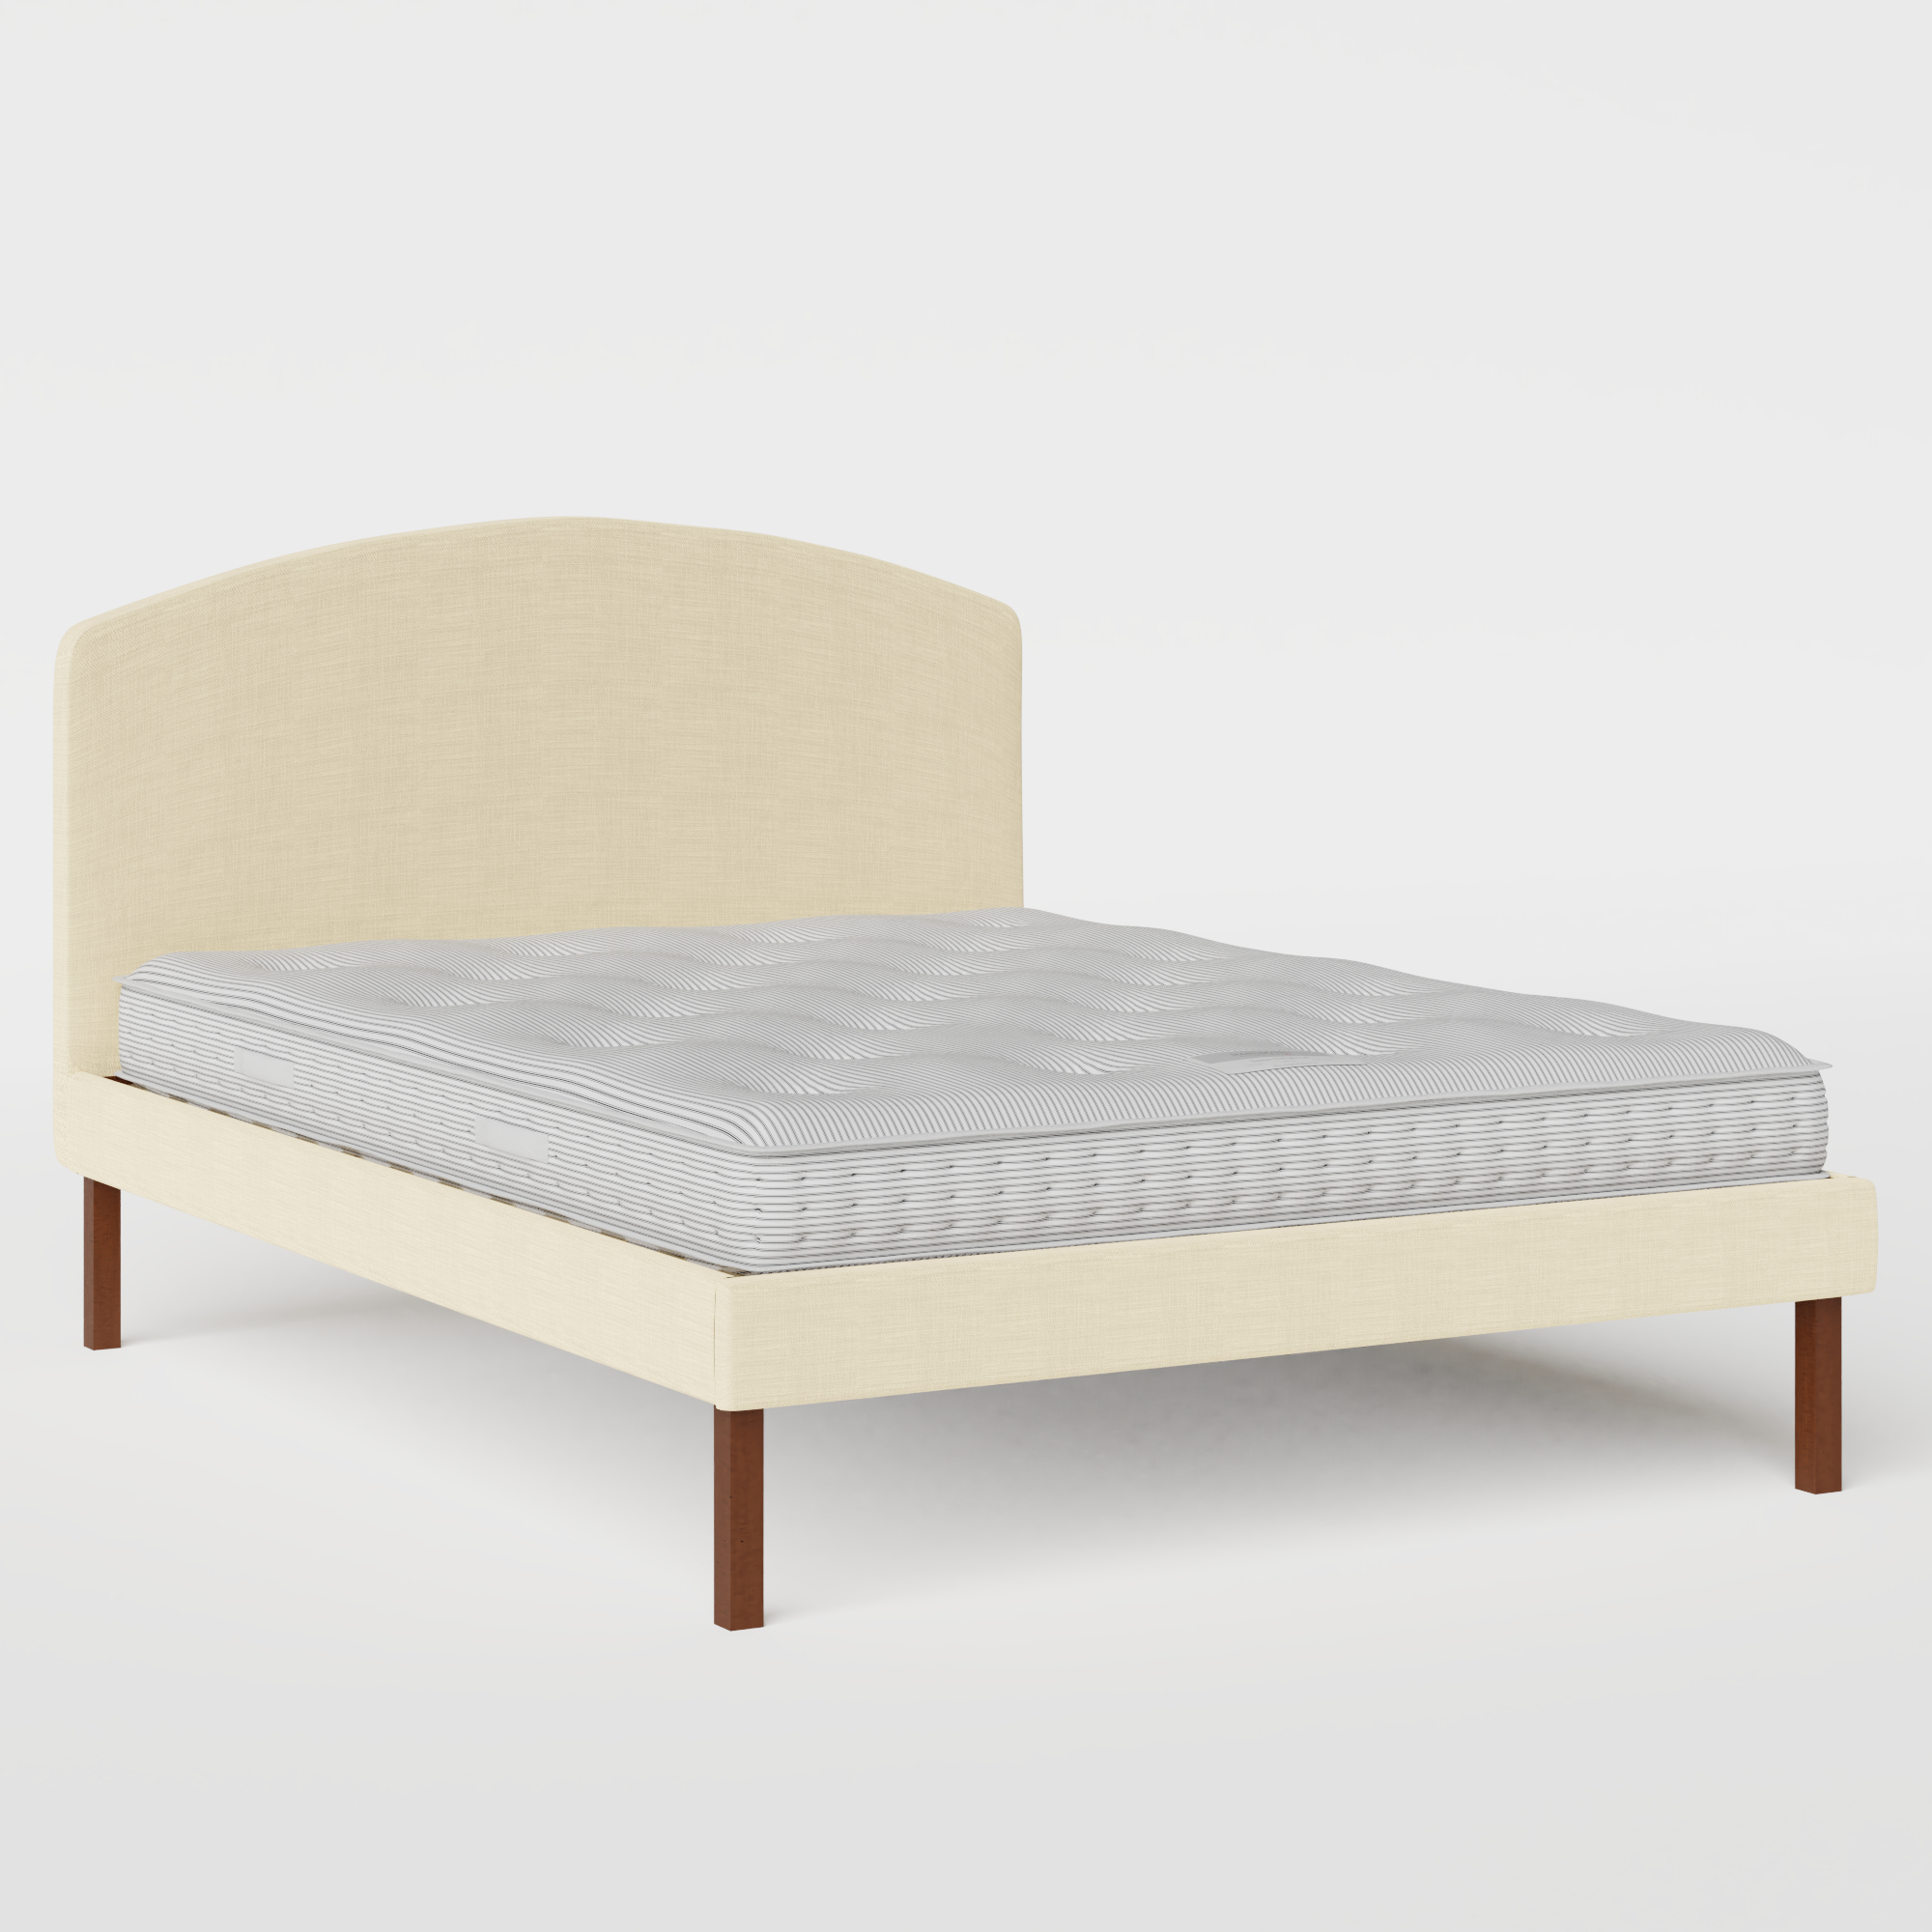 Okawa Upholstered upholstered bed in natural fabric